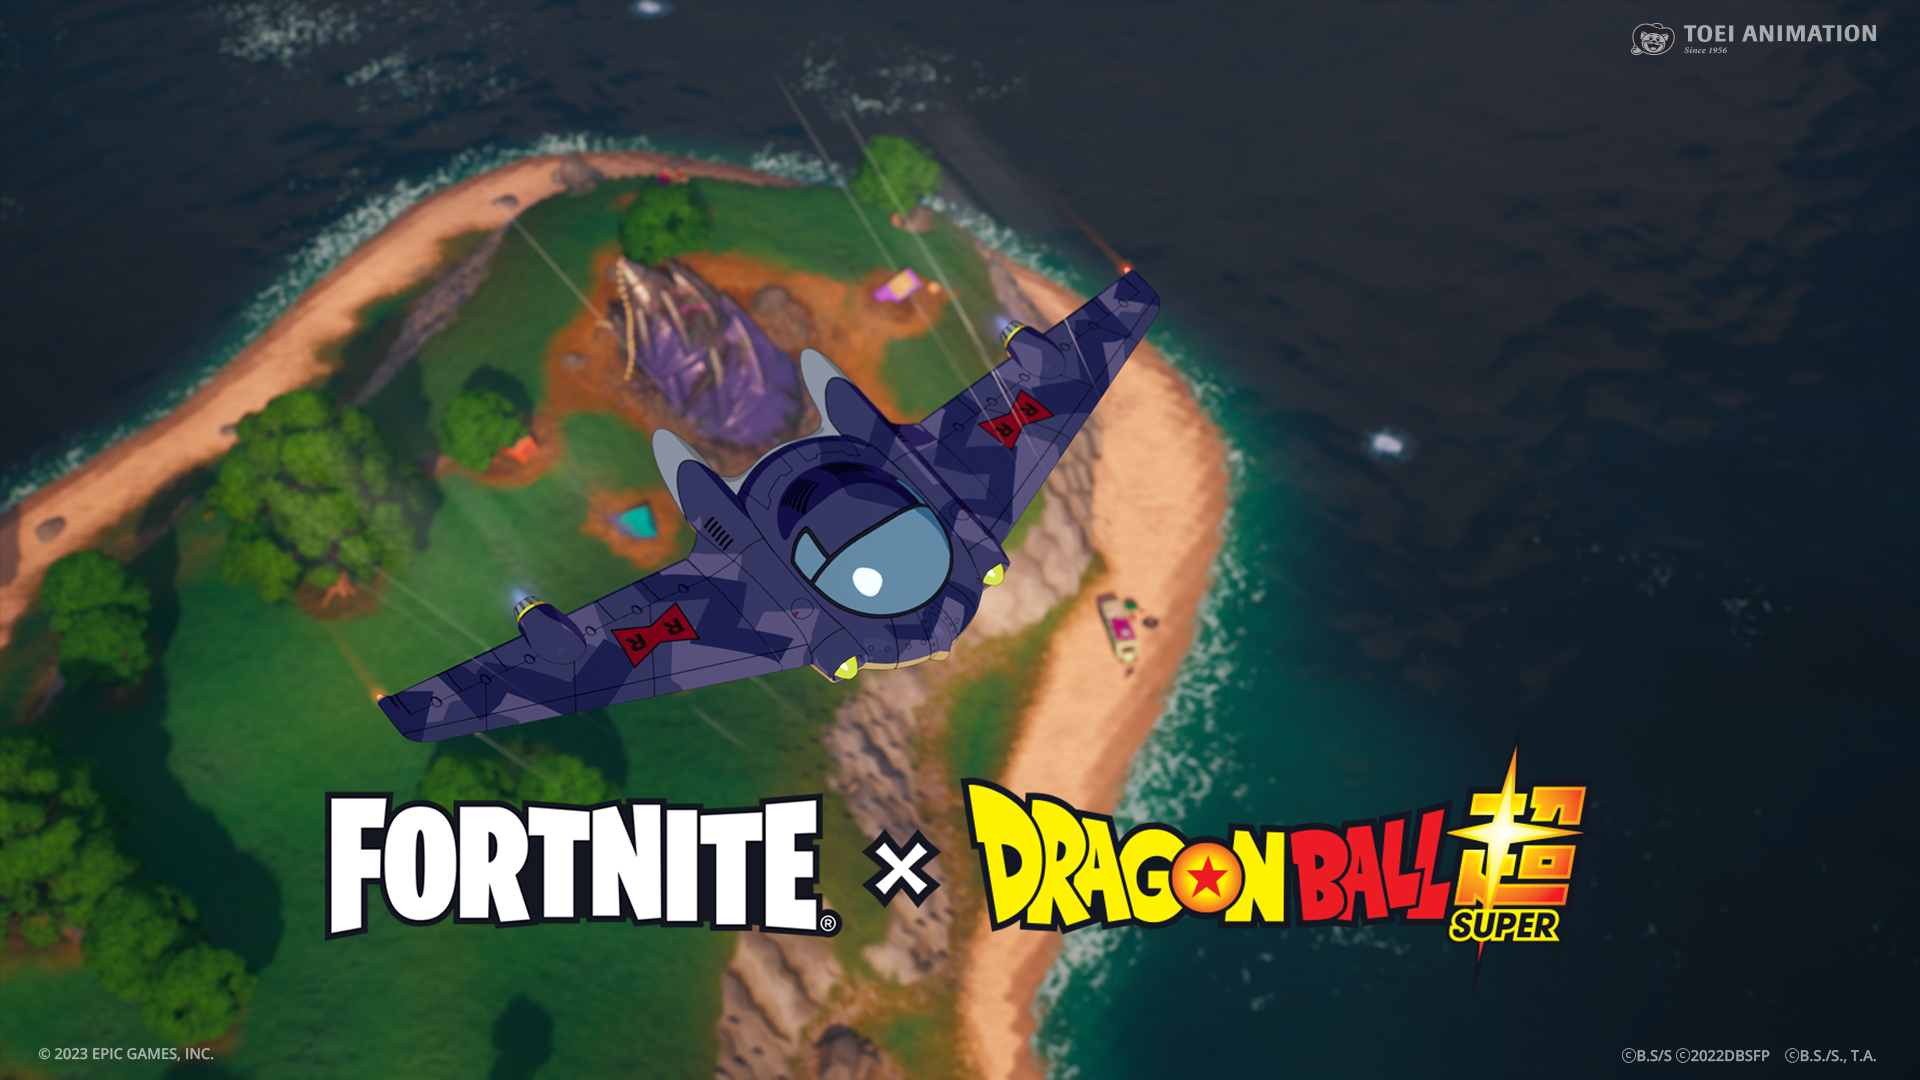 Fortnite will have a collaboration this time with Dragon Ball Super characters